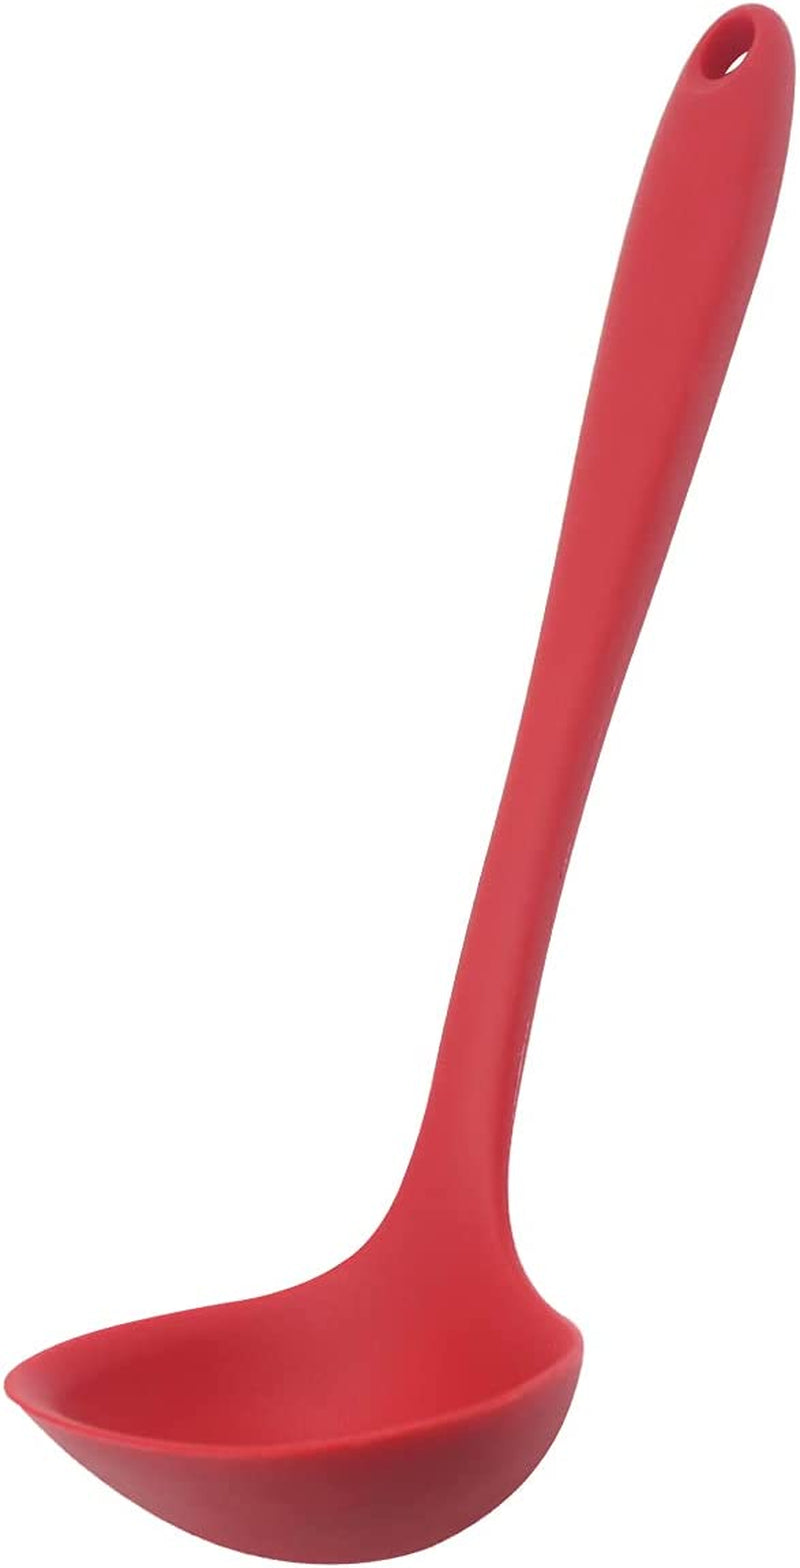 MJIYA Silicone Ladle Spoon, MJIYA Seamless & Nonstick Kitchen Ladles, Silicone Heat Resistant Kitchen Cooking Utensils Non-Stick Baking Tool Tongs Ladle Gadget (Red) (Ladle)